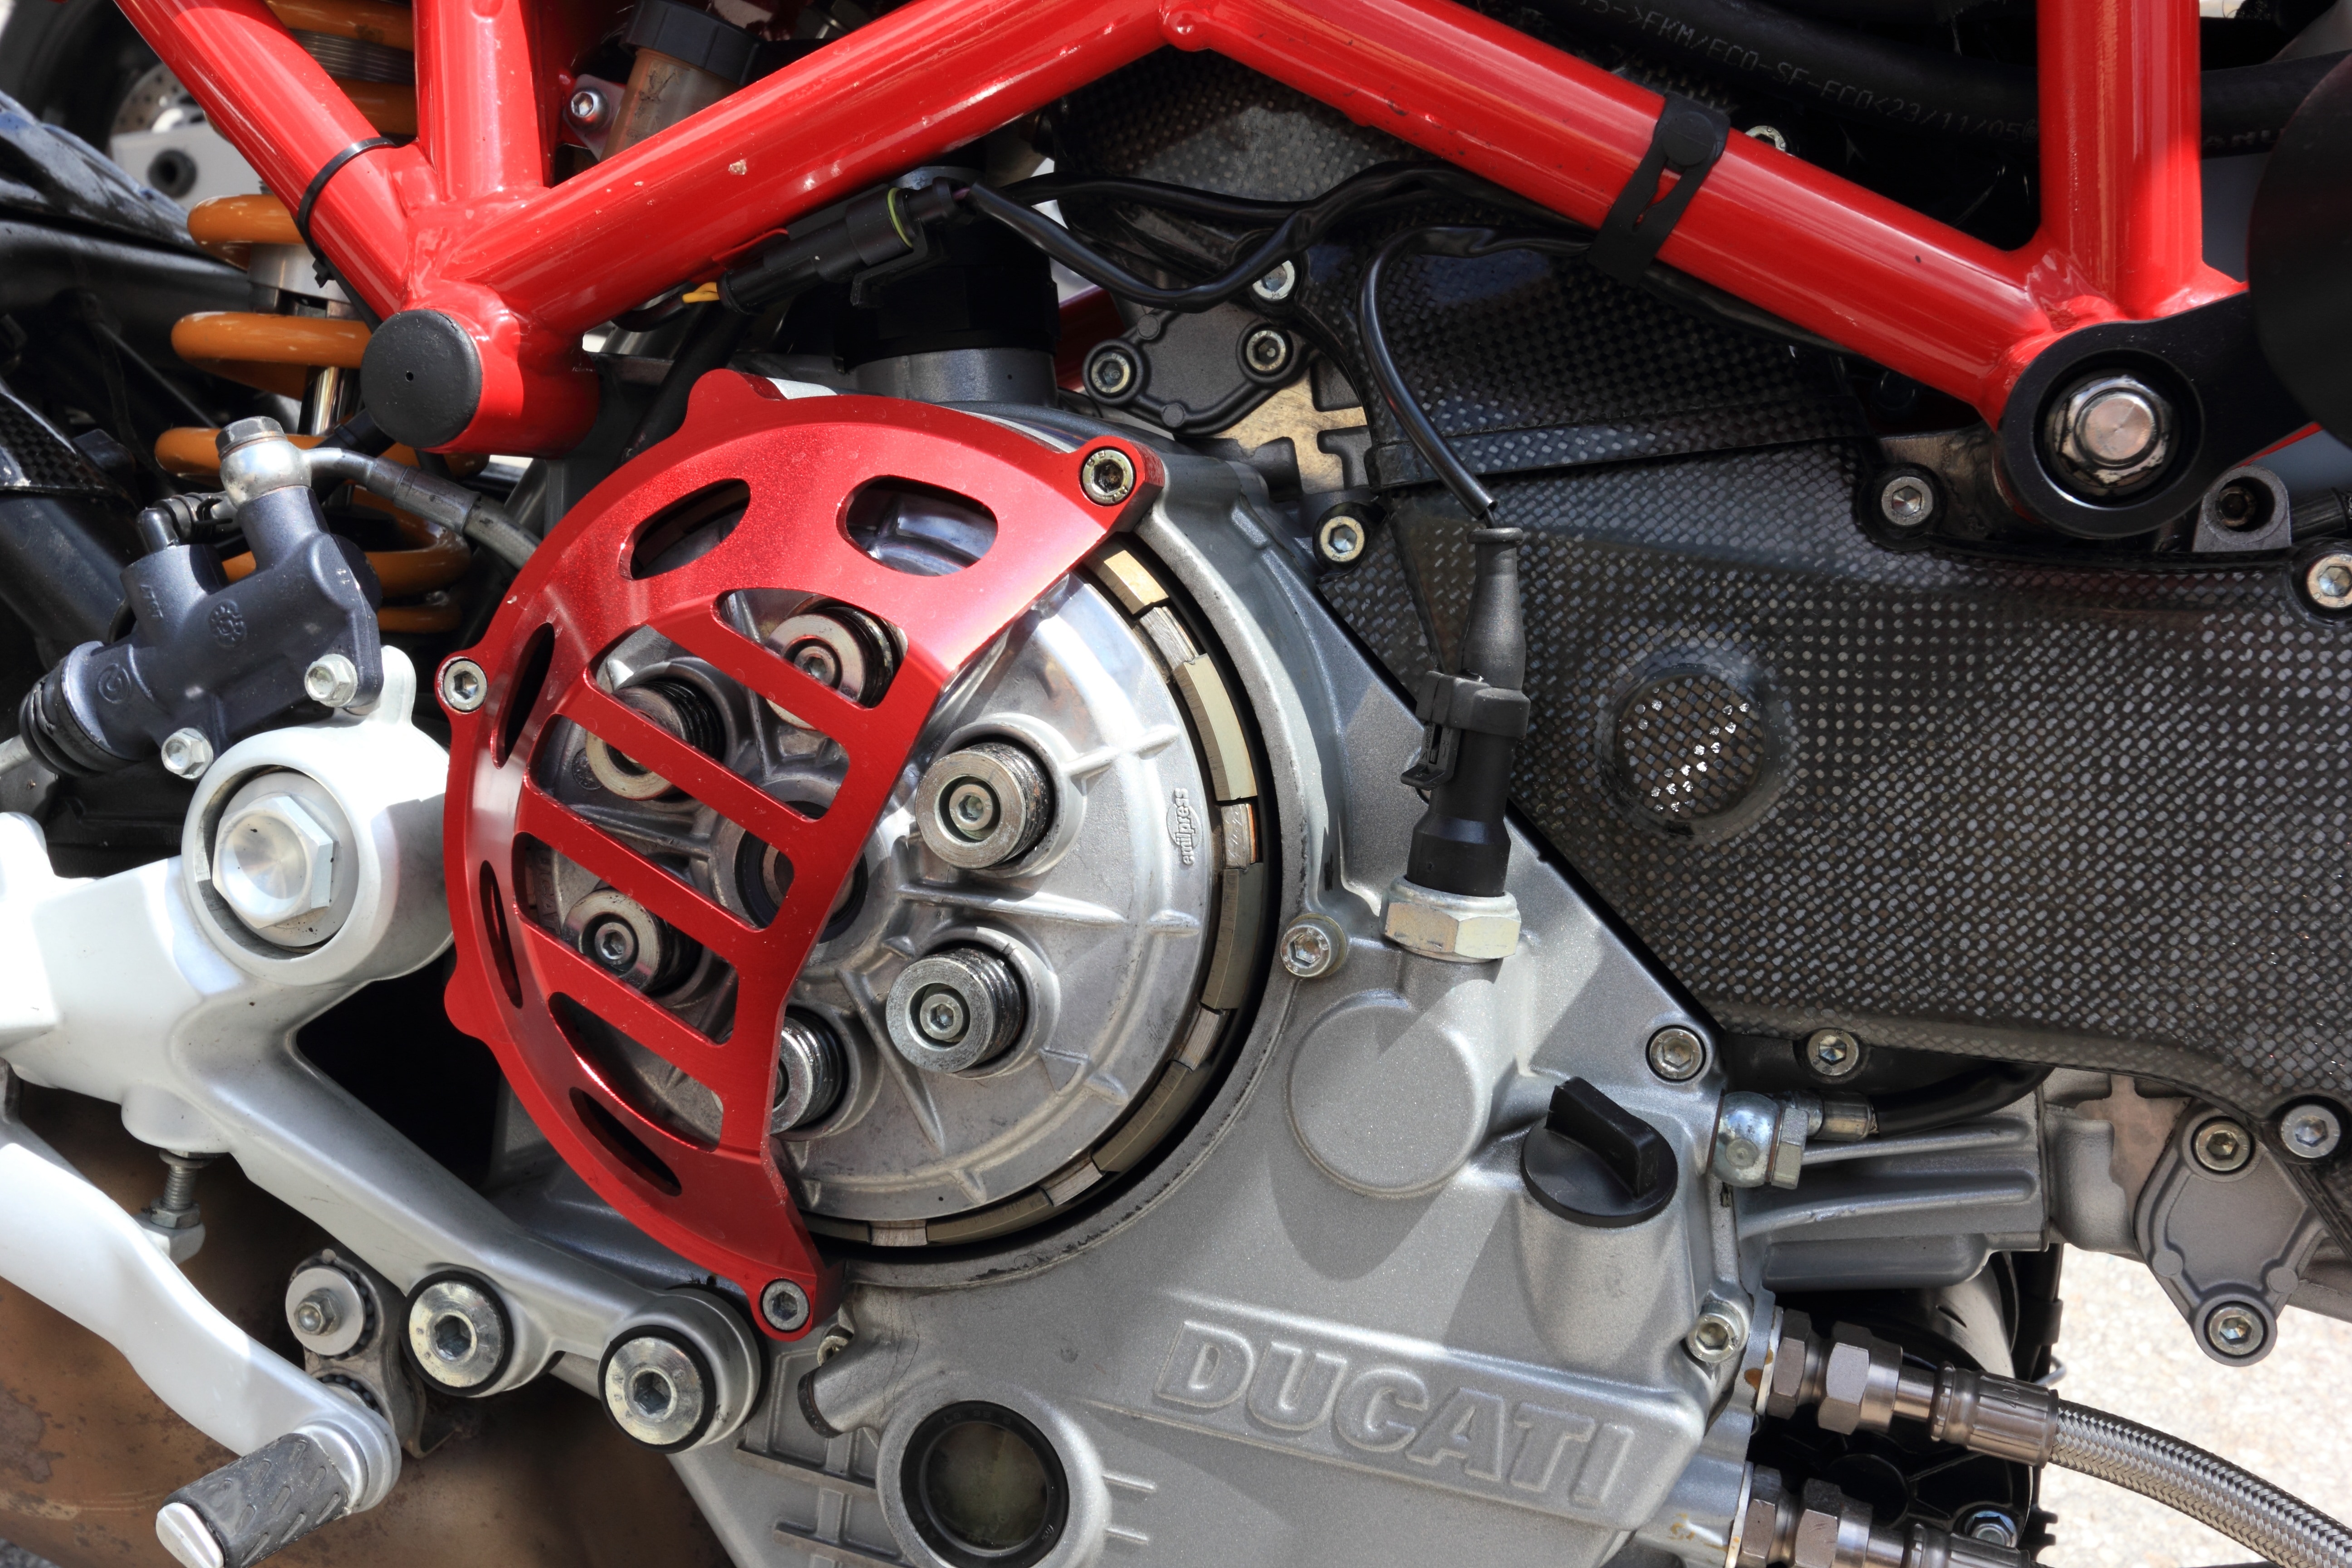 grey and red Ducati motorcycle engine closeup photography